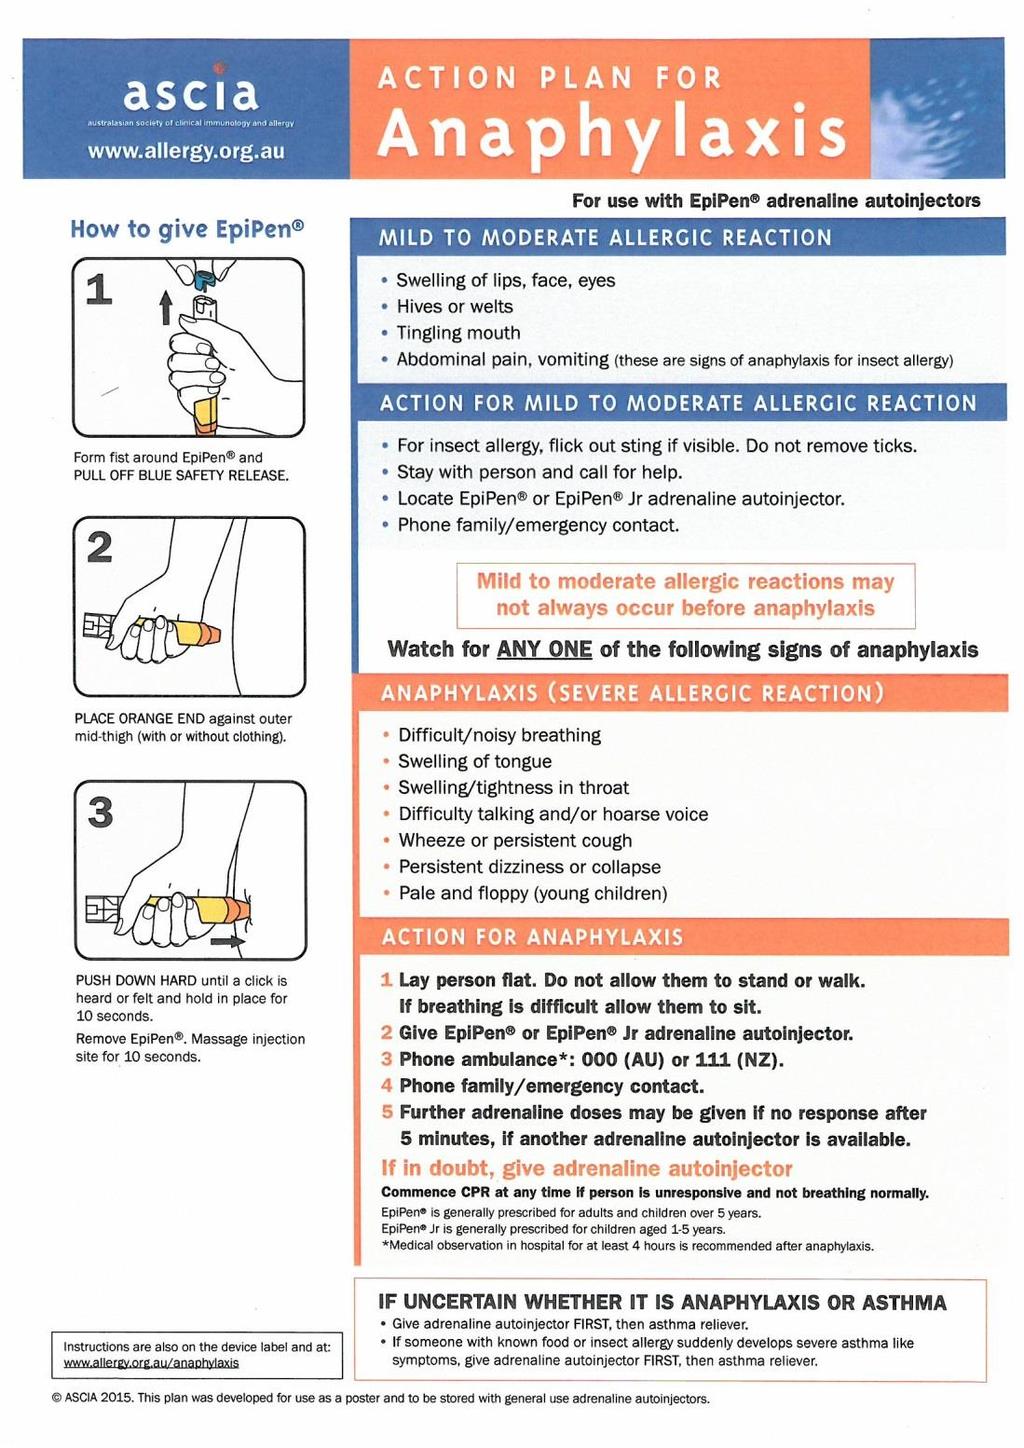 Appendix 1 - ASCIA Action Plans There are three different types of ASCIA Action Plans: ASCIA Action Plan for Anaphylaxis (personal) for use with EpiPen.